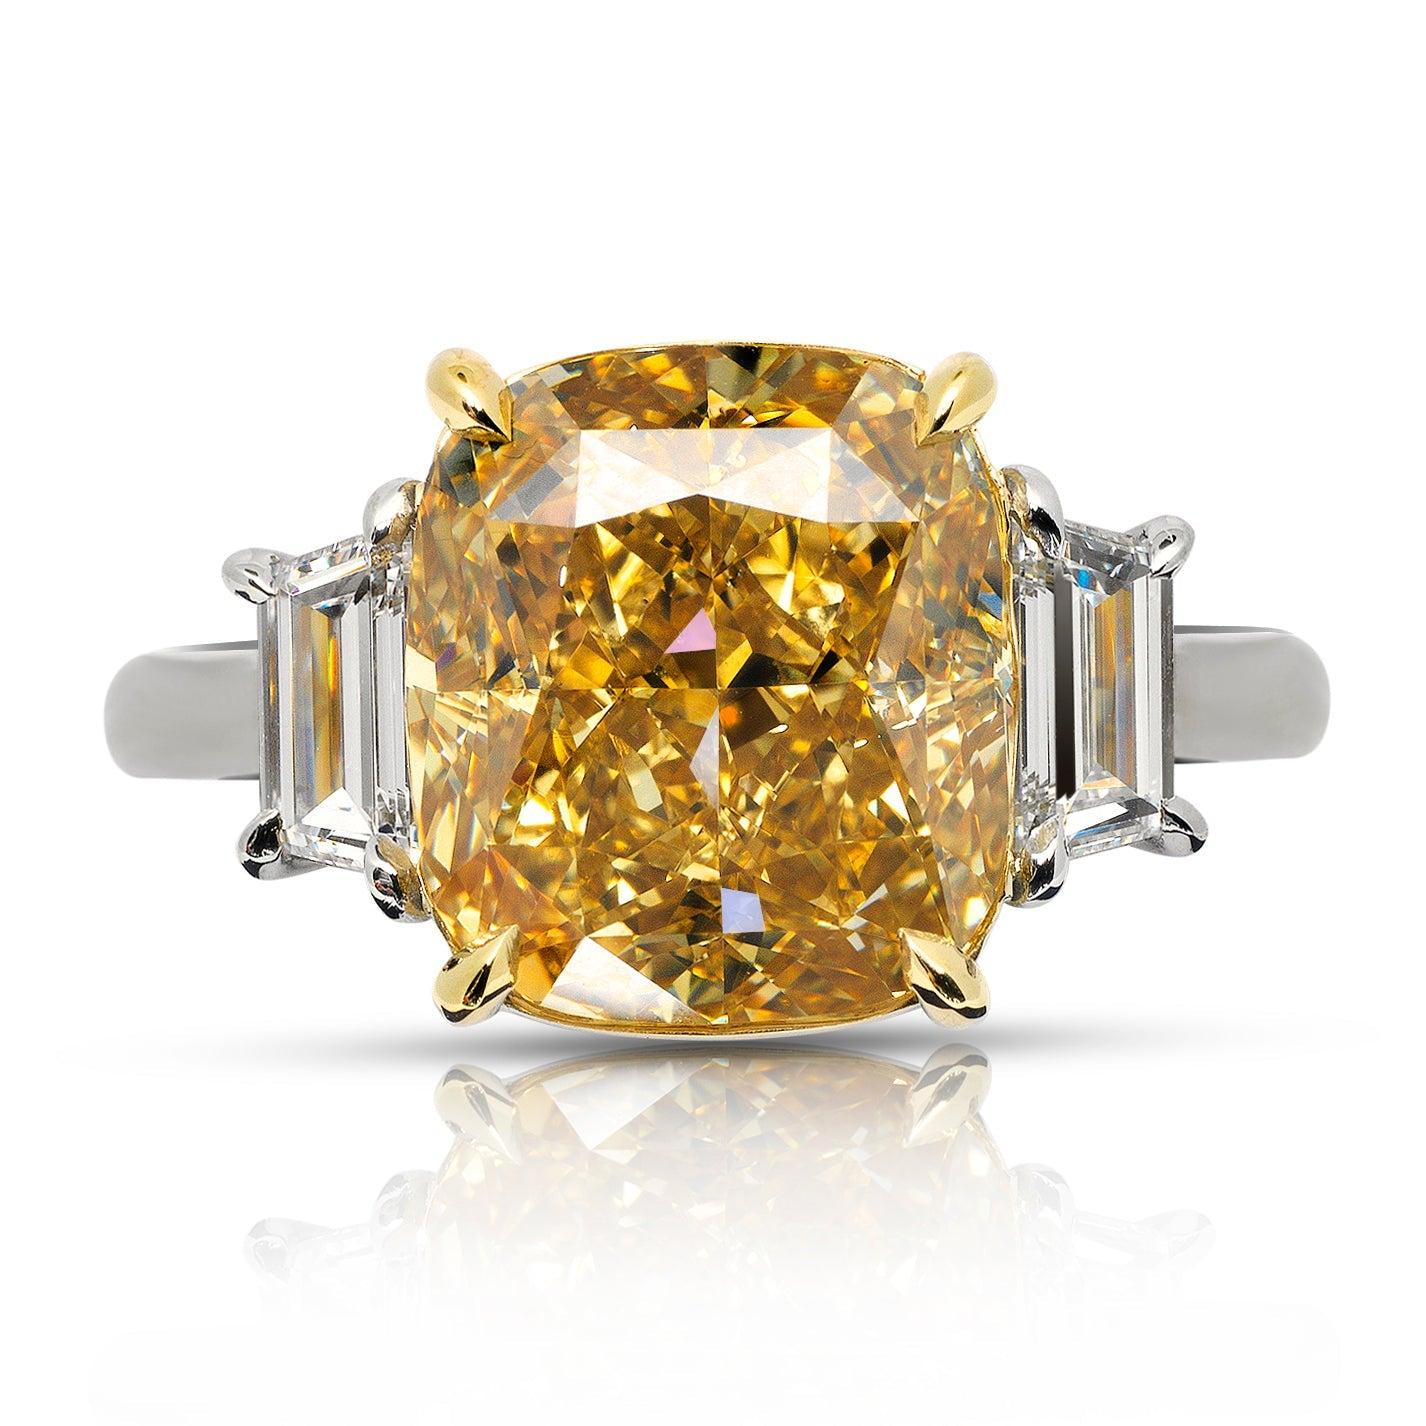 SARI  CUSHION CUT DIAMOND ENGAGEMENT RING  BY MIKE NEKTA
GIA CERTIFIED

Center Diamond
Carat Weight: 5.6 Carats
Color : NATURAL FANCY DEEP BROWNISH YELLOW FDBY
Clarity: SI1
Style: CUSHION CUT
Approximate Measurements:  10.4 x 9.3 x 6.4 mm
